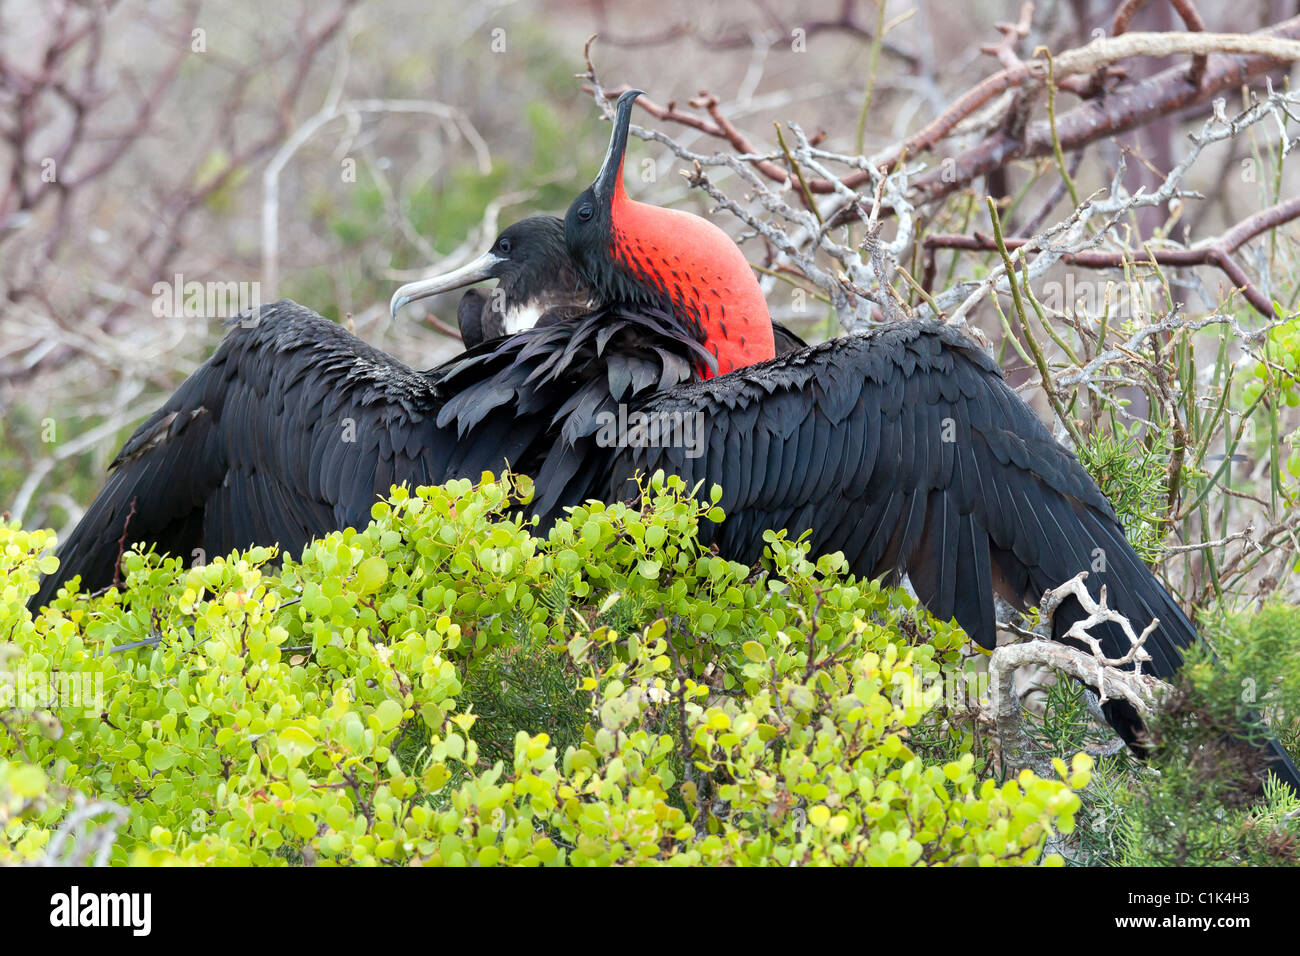 Magnificient frigatebird couple mating in the Galapagos islands (Seymour Norte), also named pirate birds Stock Photo